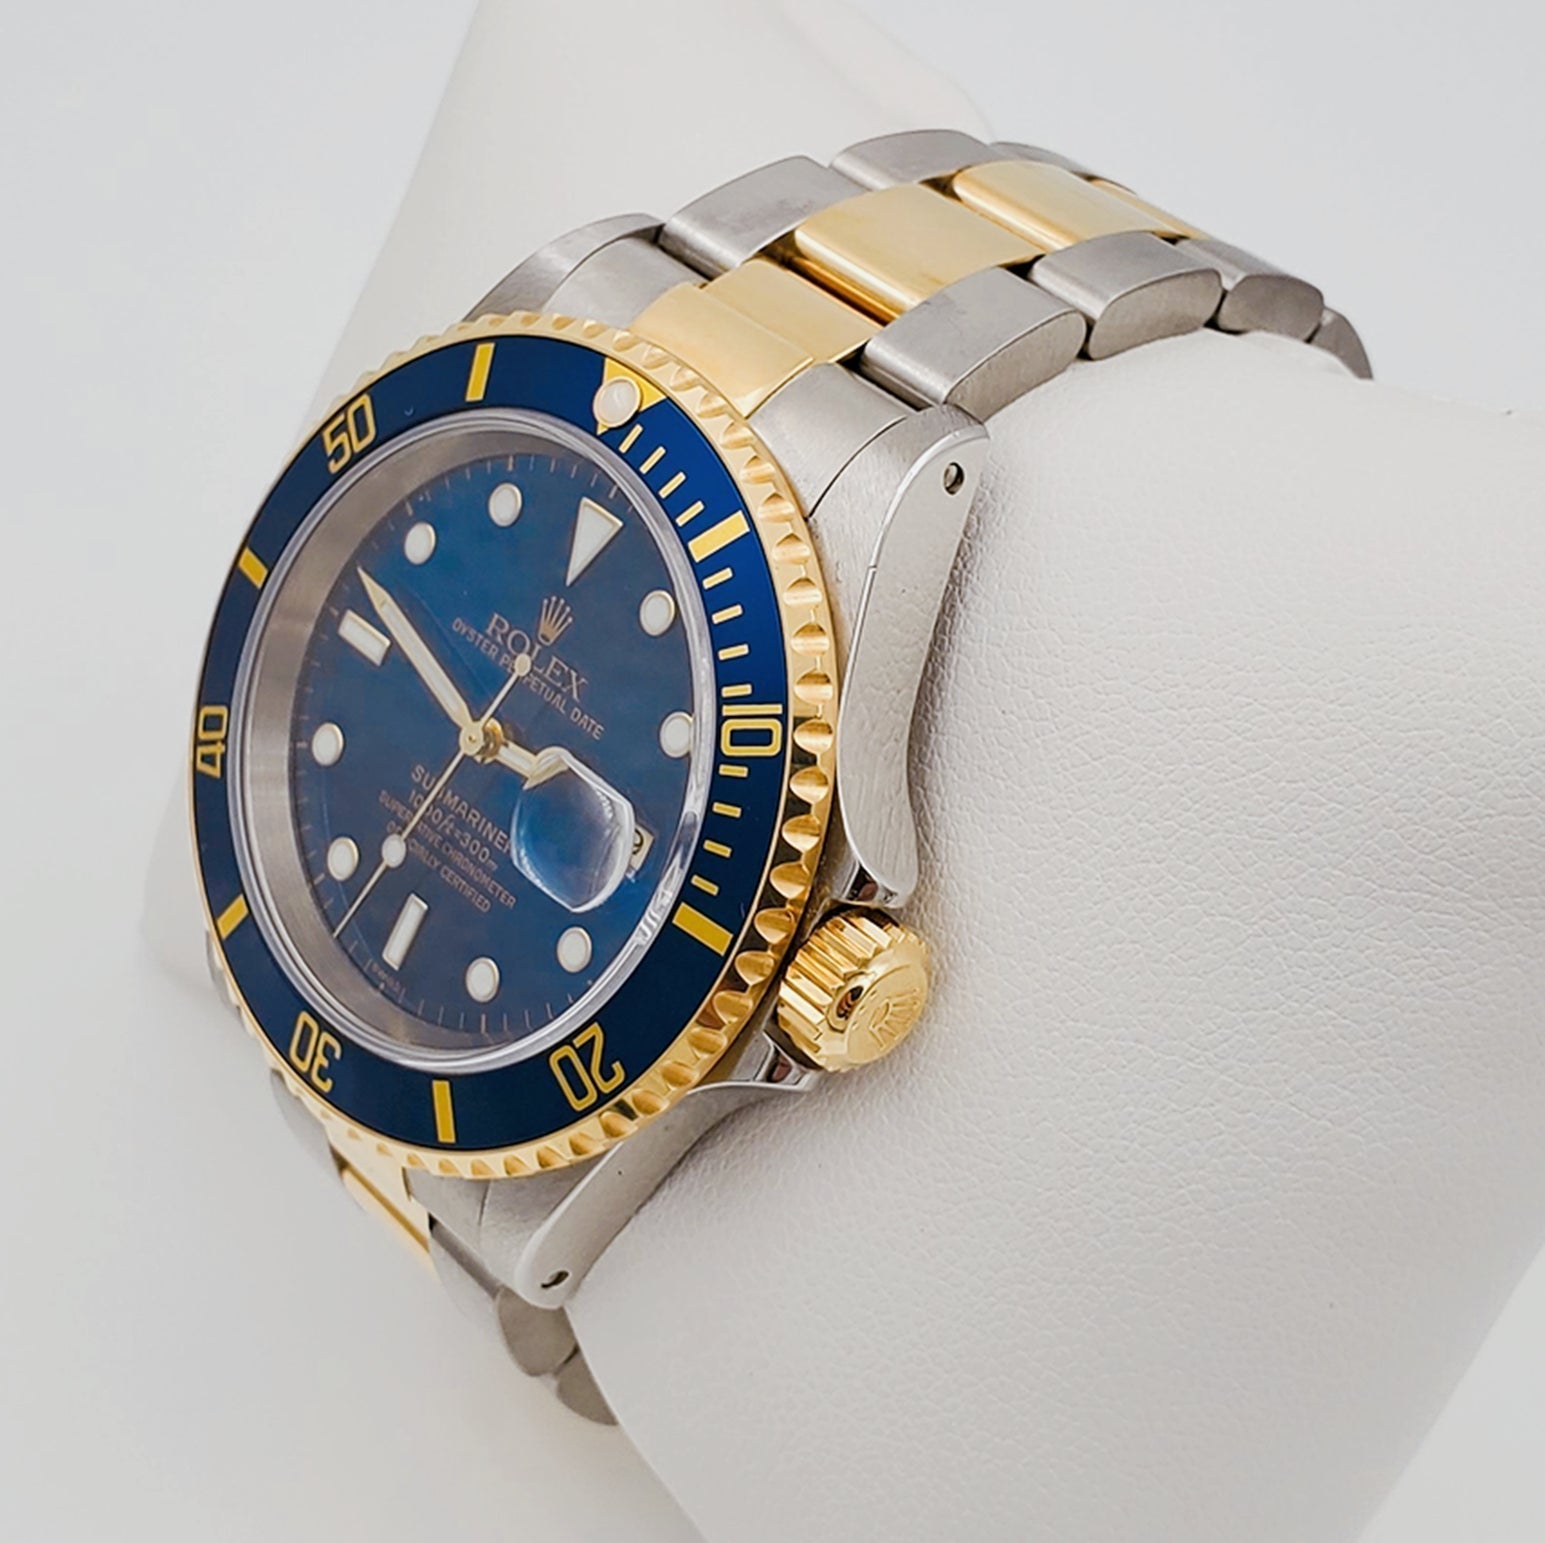 Men's Rolex Submariner 40mm Date 16610 Oyster Perpetual Two-Tone 18K Yellow Gold / Stainless Steel Watch with Blue Dial and Blue Bezel. (Pre-Owned)